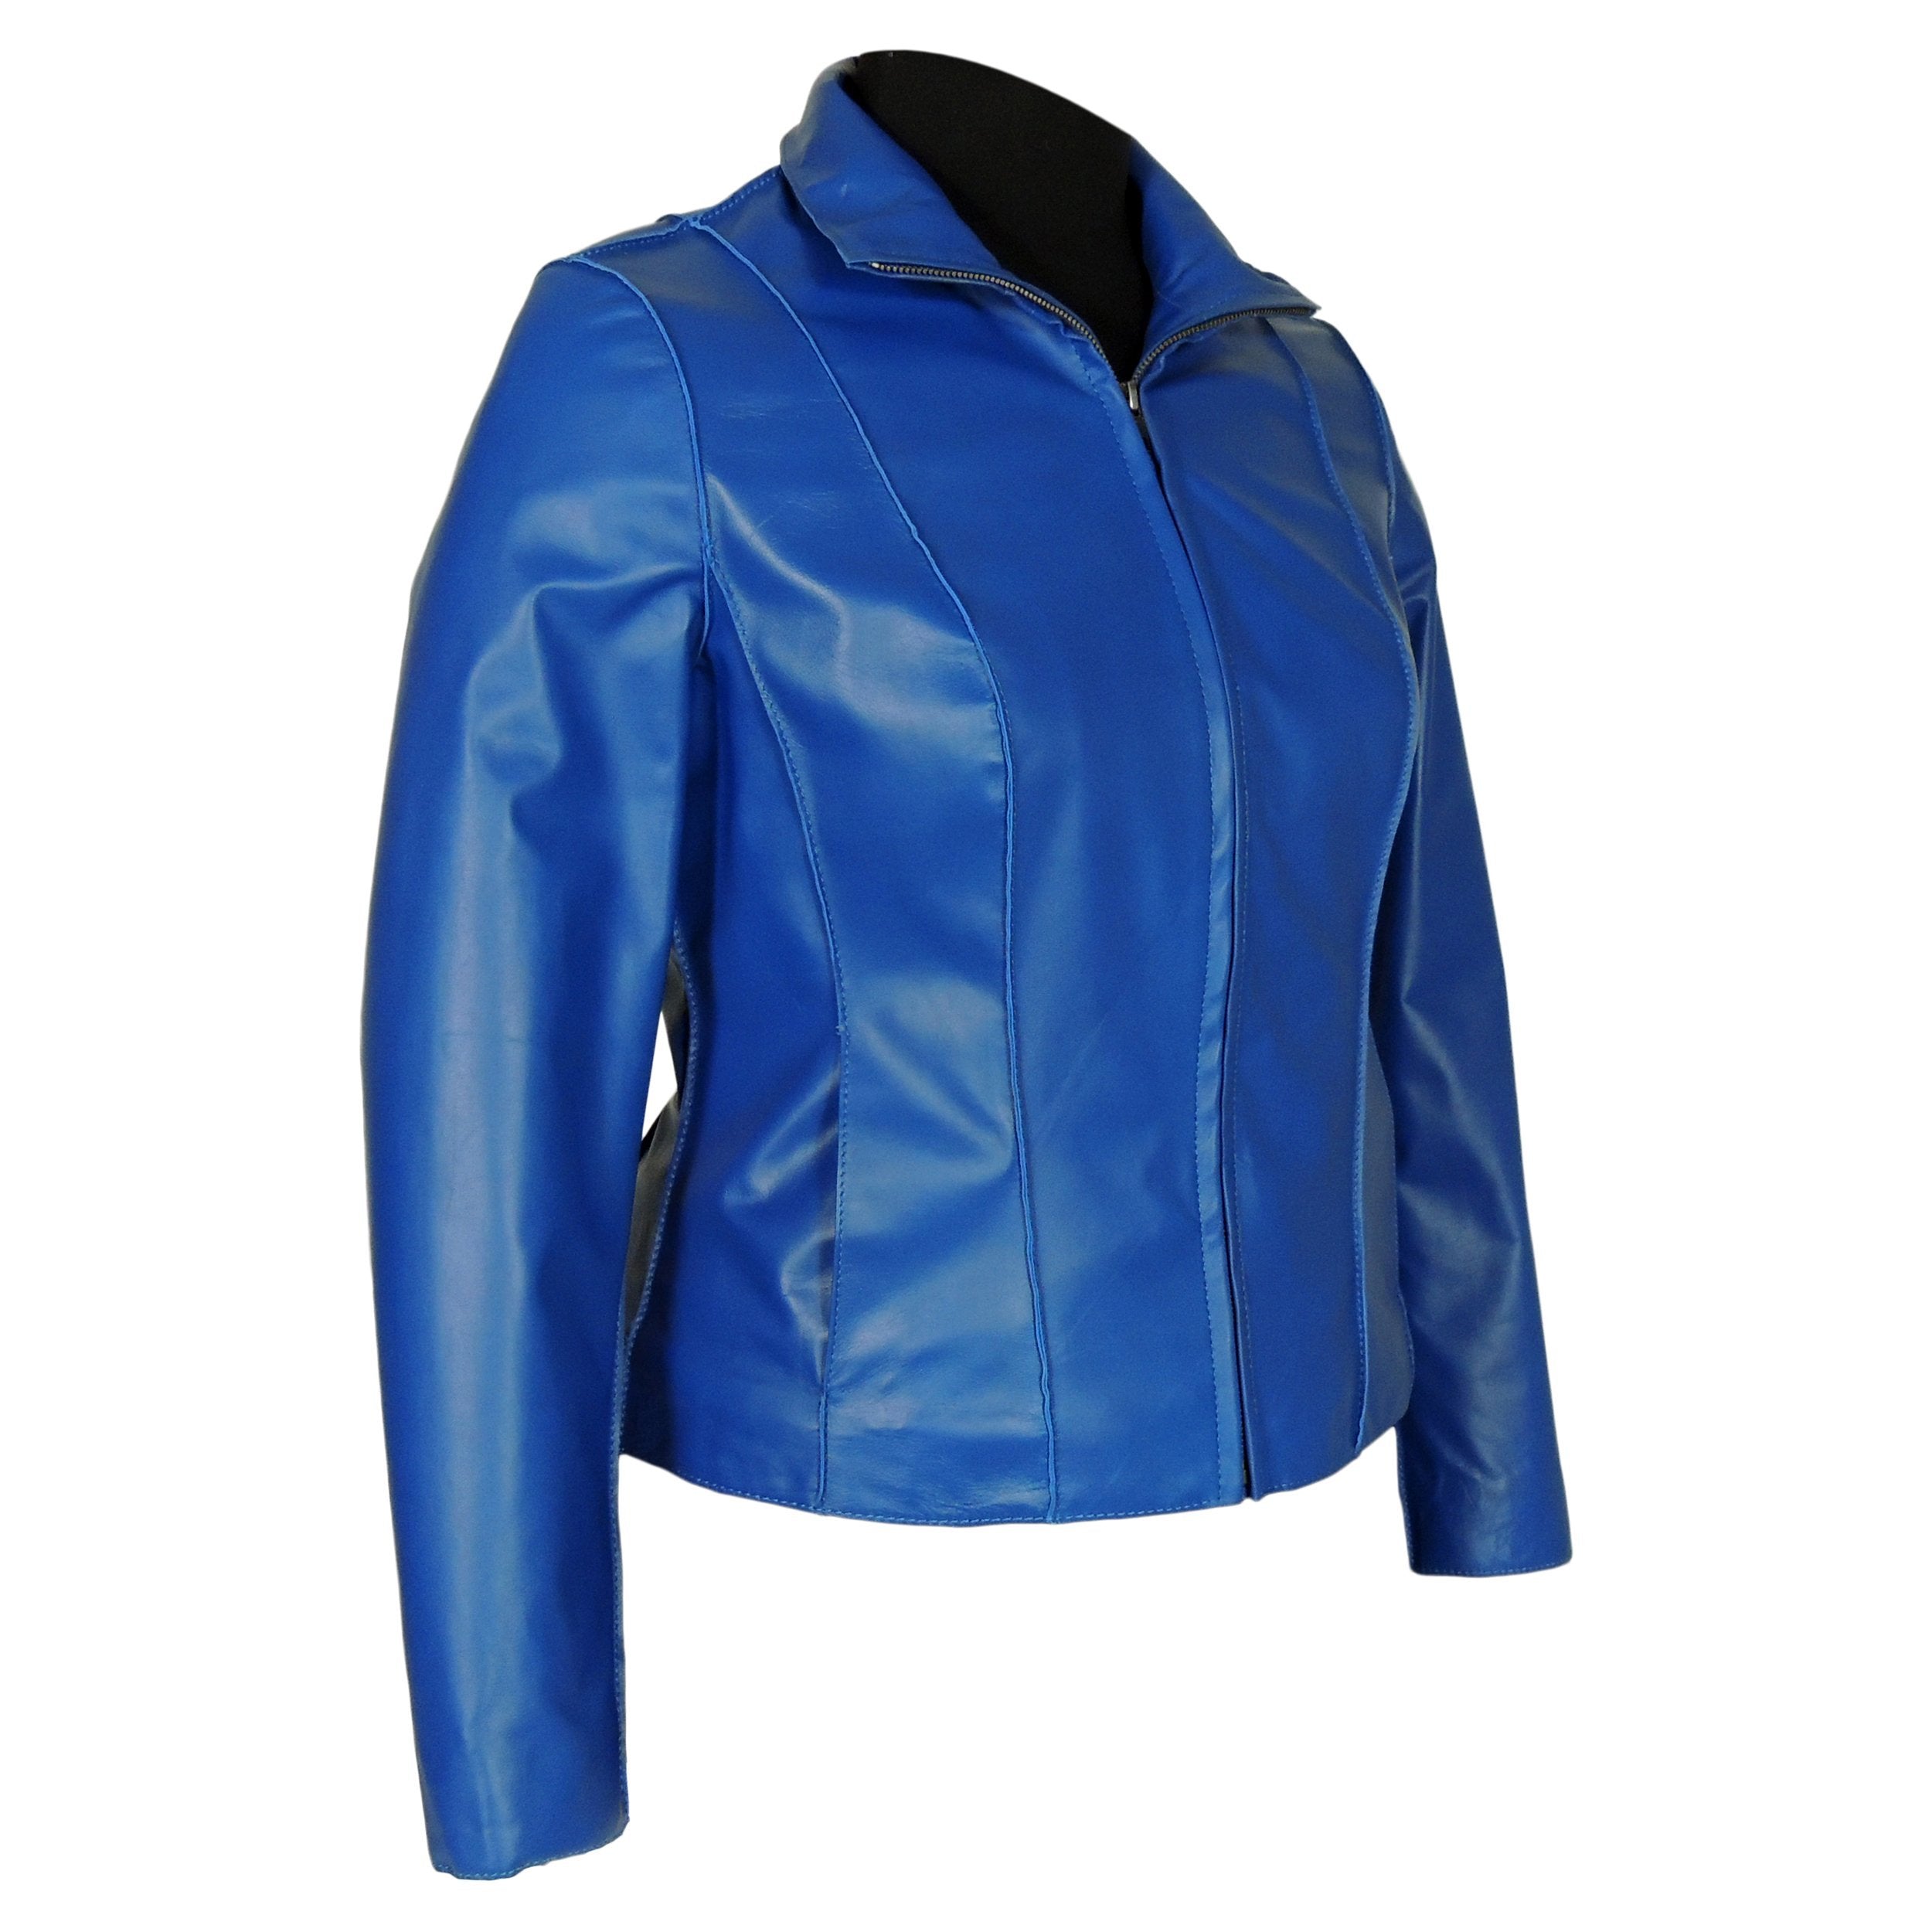 Picture of a Women's Professional Stunner Sheepskin Leather Jacket blue front side view